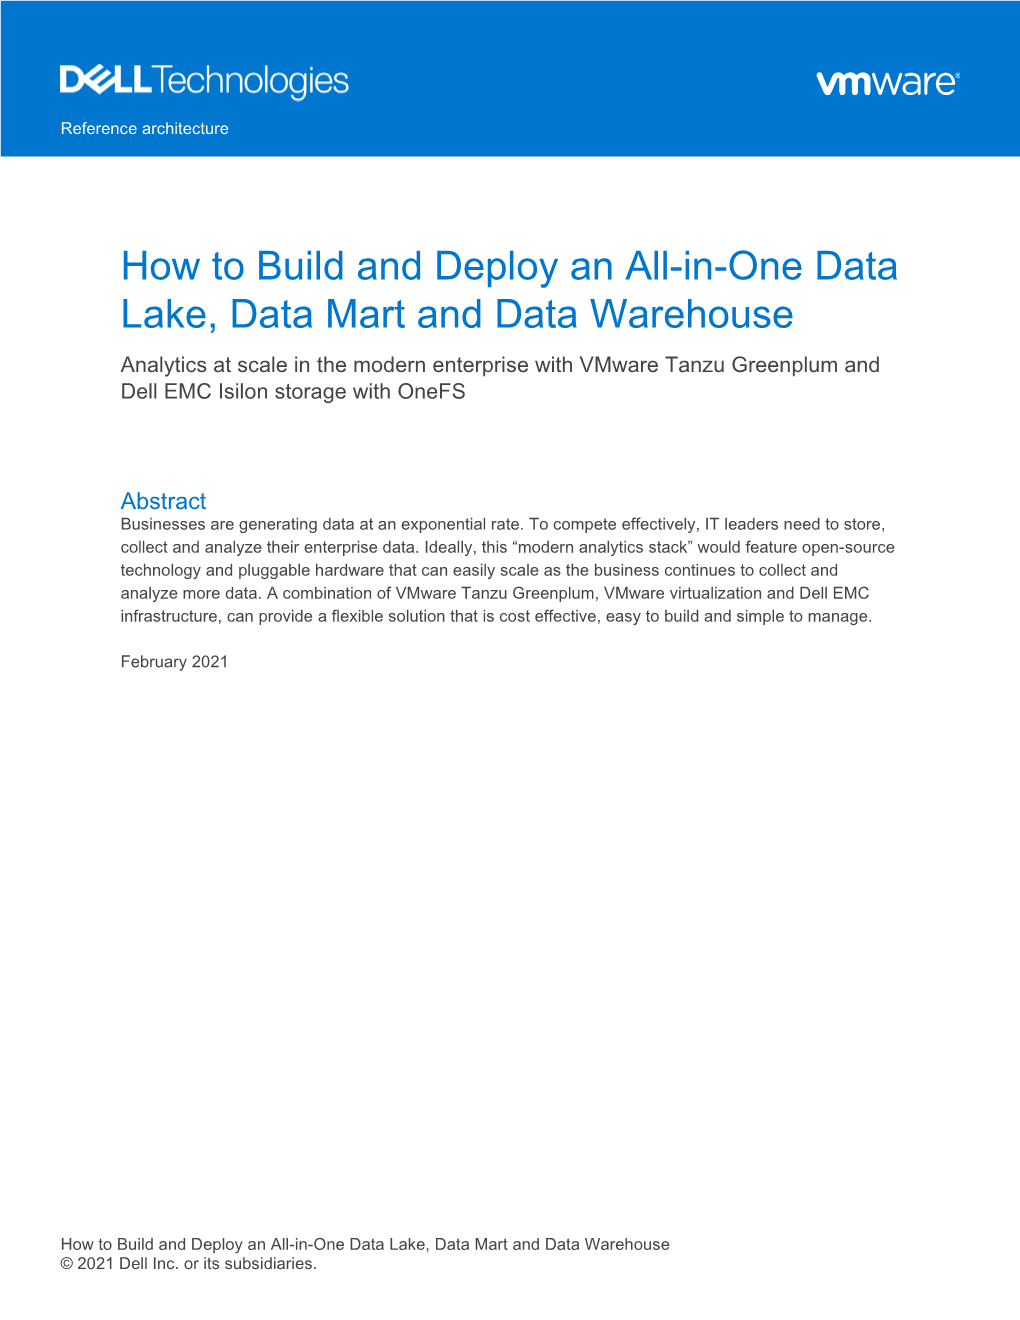 How to Build and Deploy an All-In-One Data Lake, Data Mart